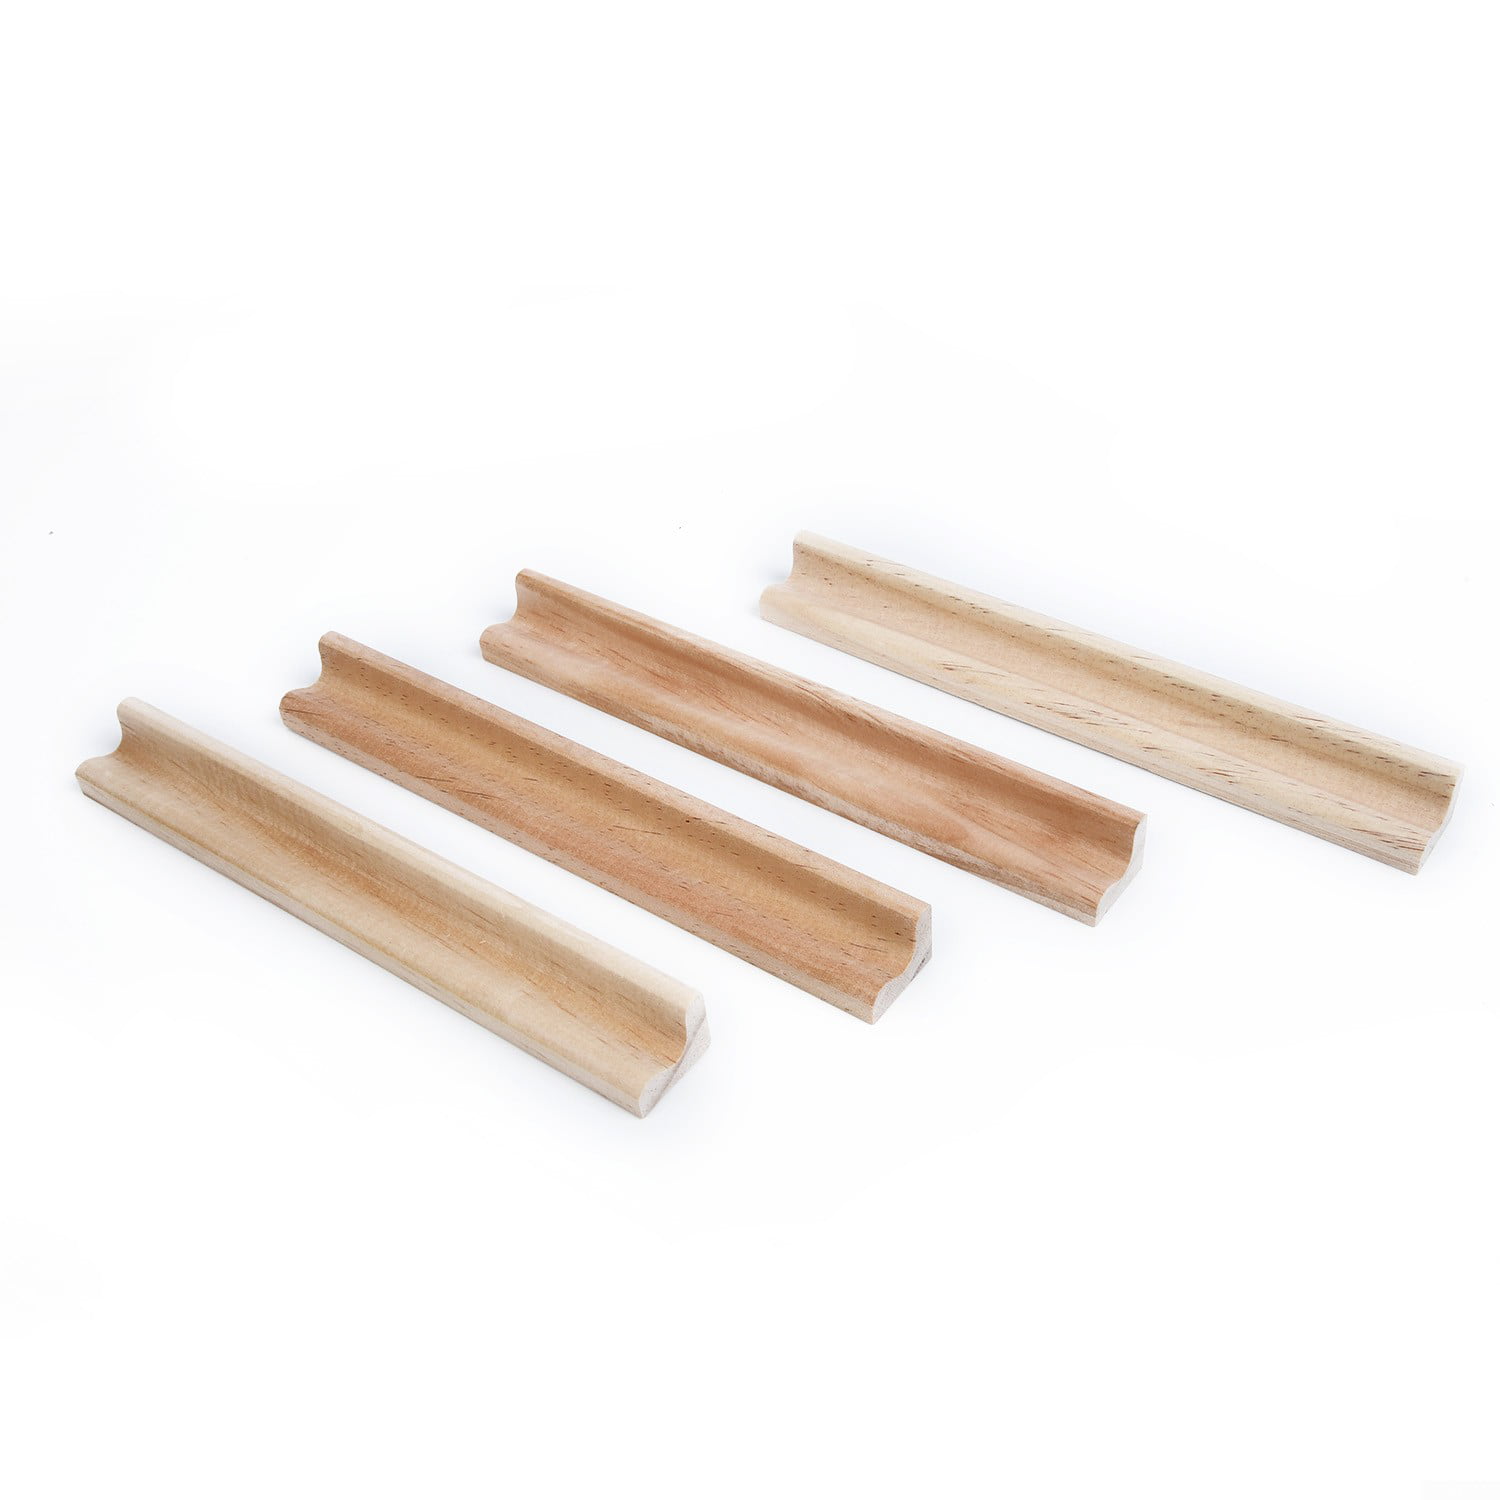 Natural Wood Tile Rack Stand Wooden Replacement Holder Craft 4Pcs Scrabble Kit 